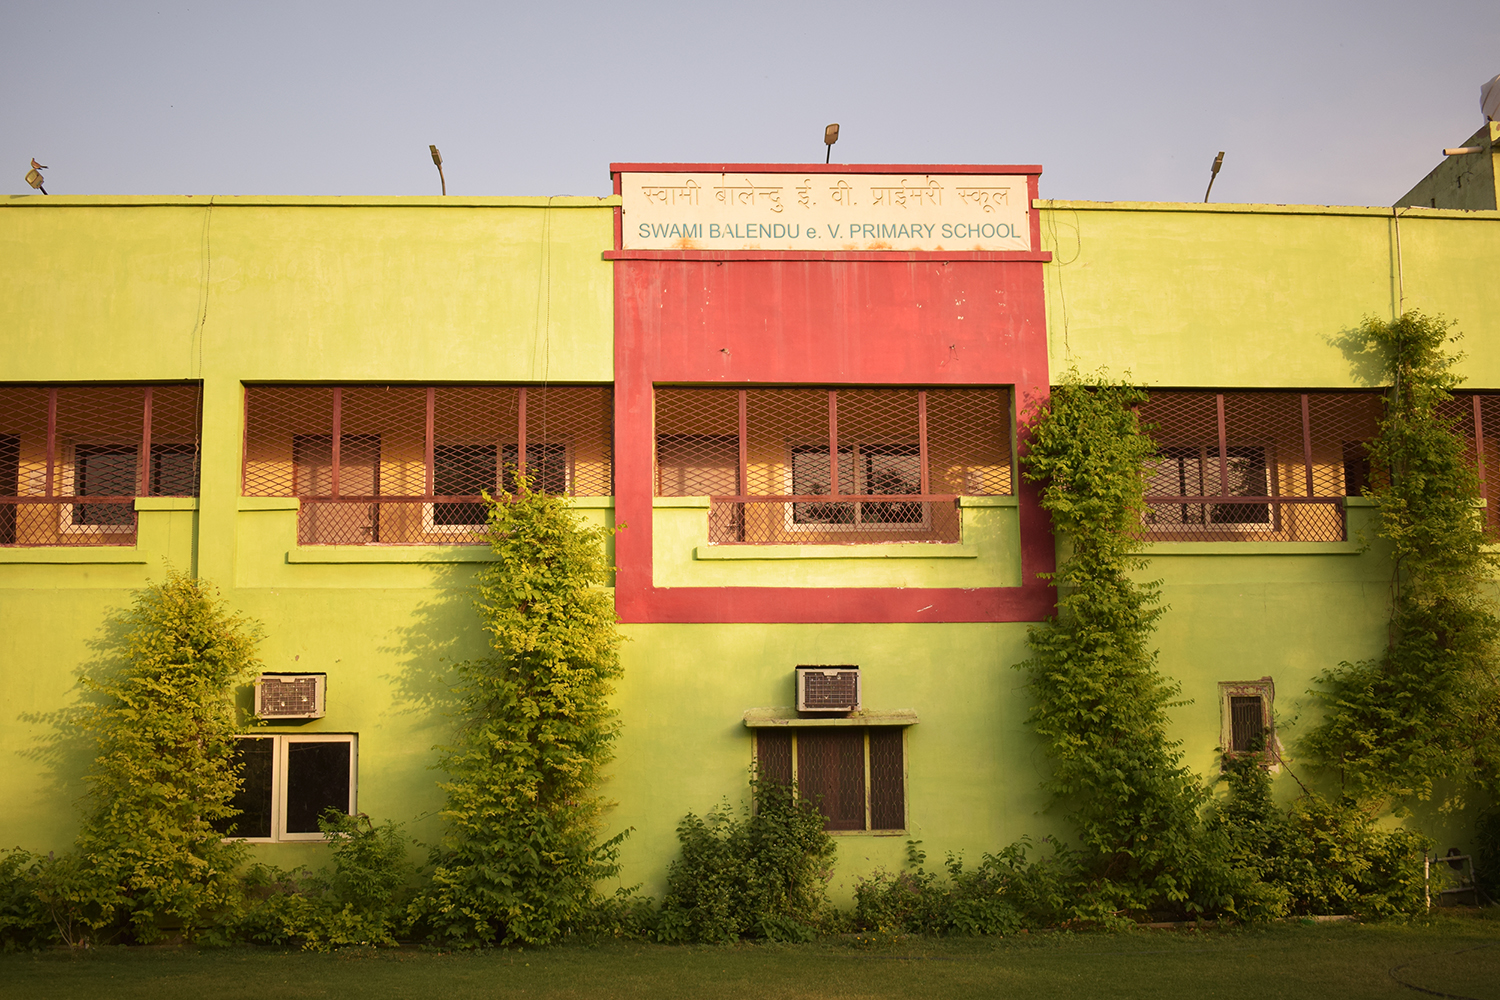 The school for underprivileged children run by humanist Purnendu Goswami, on the grounds of his ashram in Vrindavan, India. Photo by Priyadarshini Sen